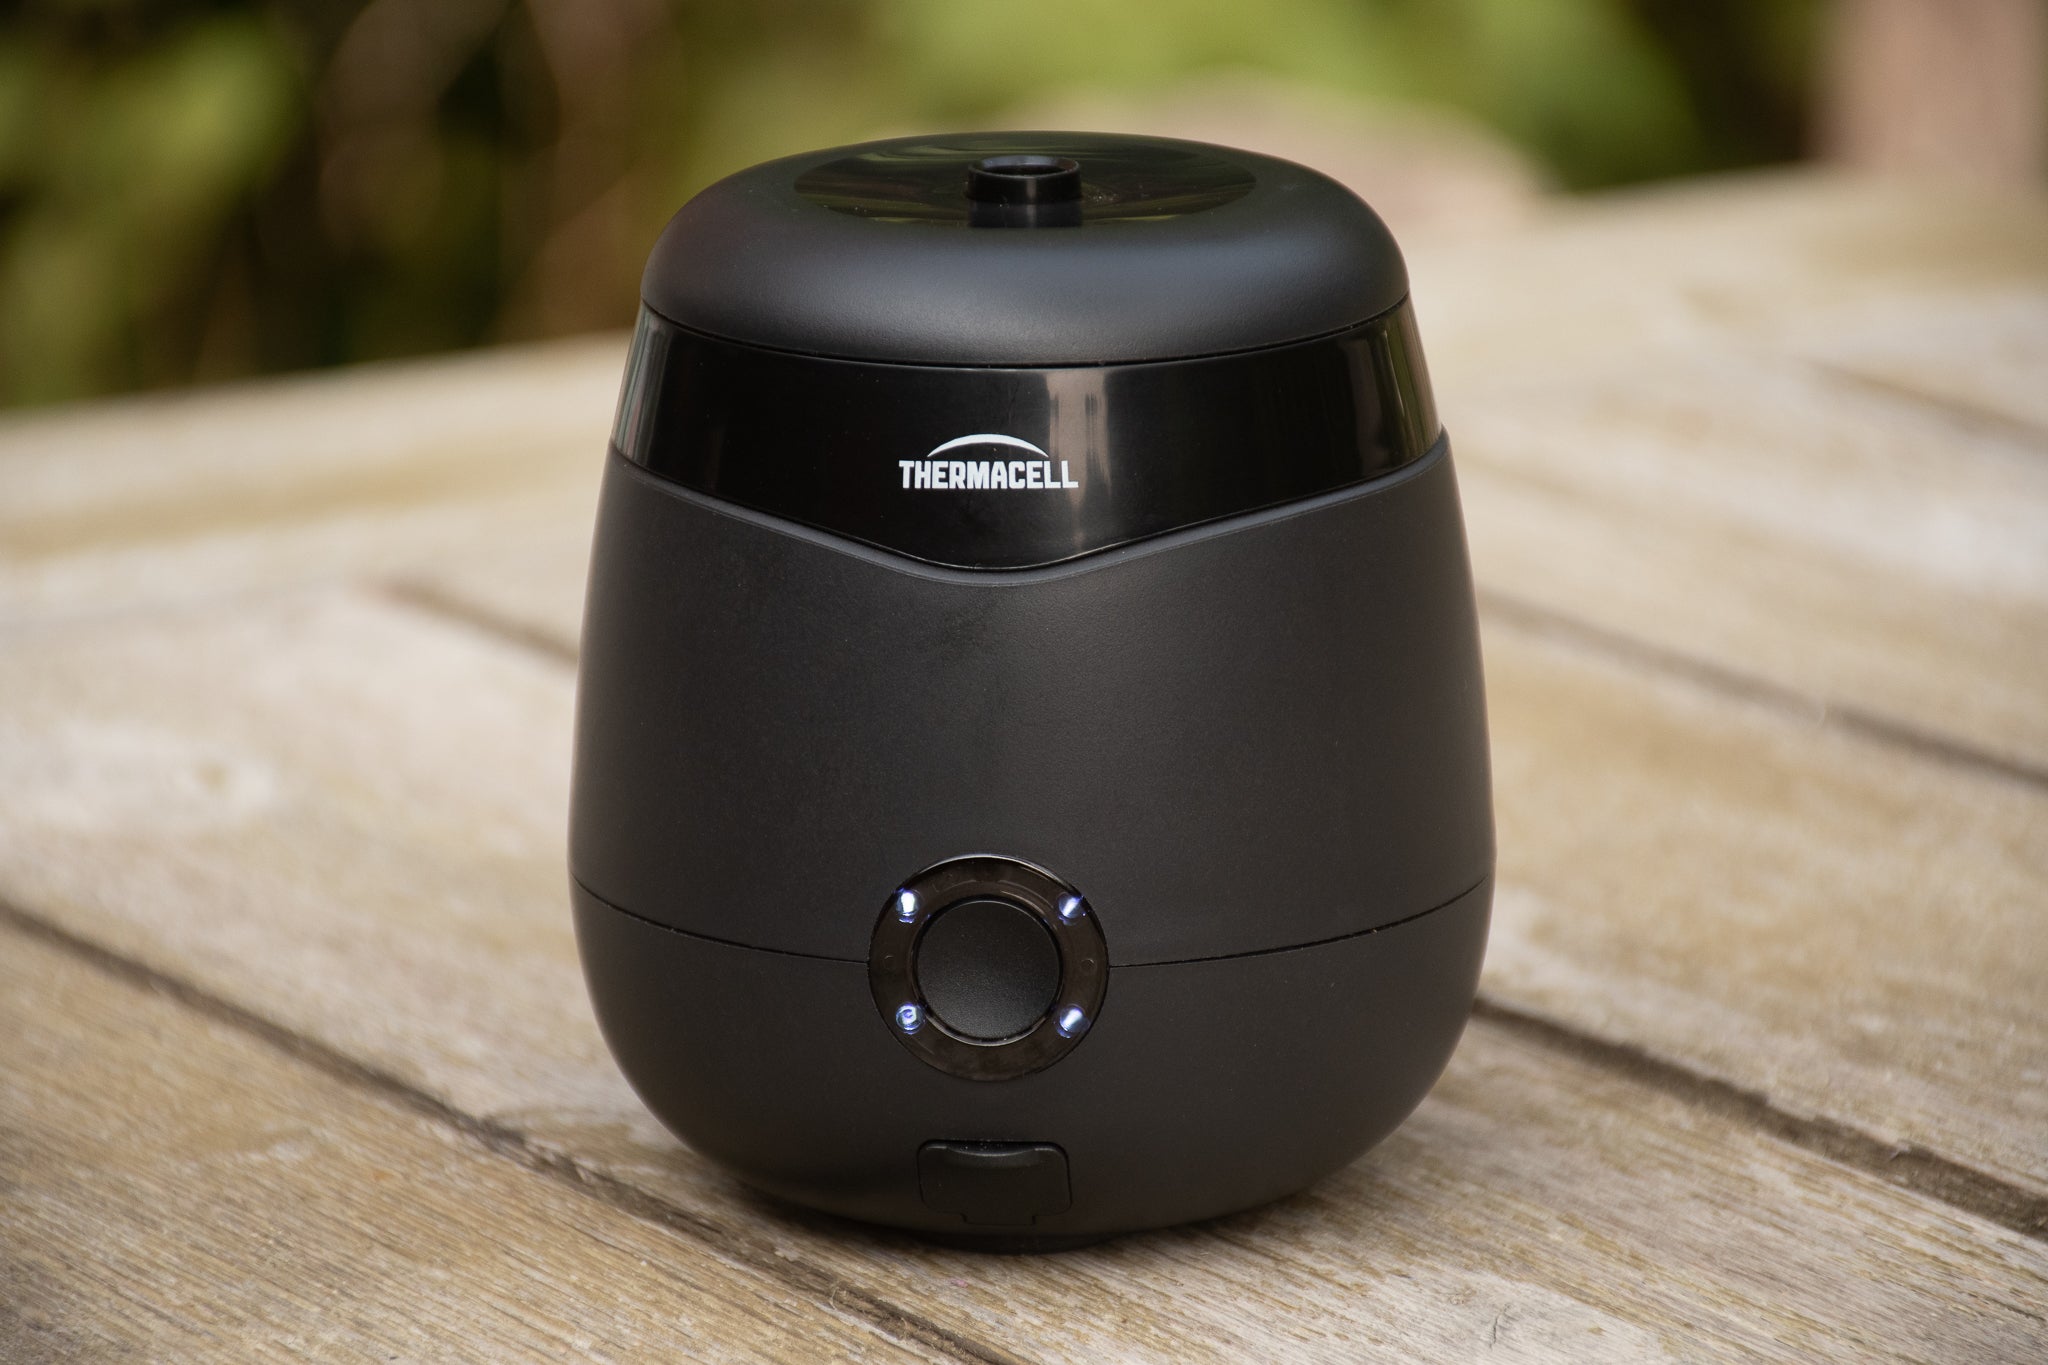 Most Powerful USB Mosquito Repeller